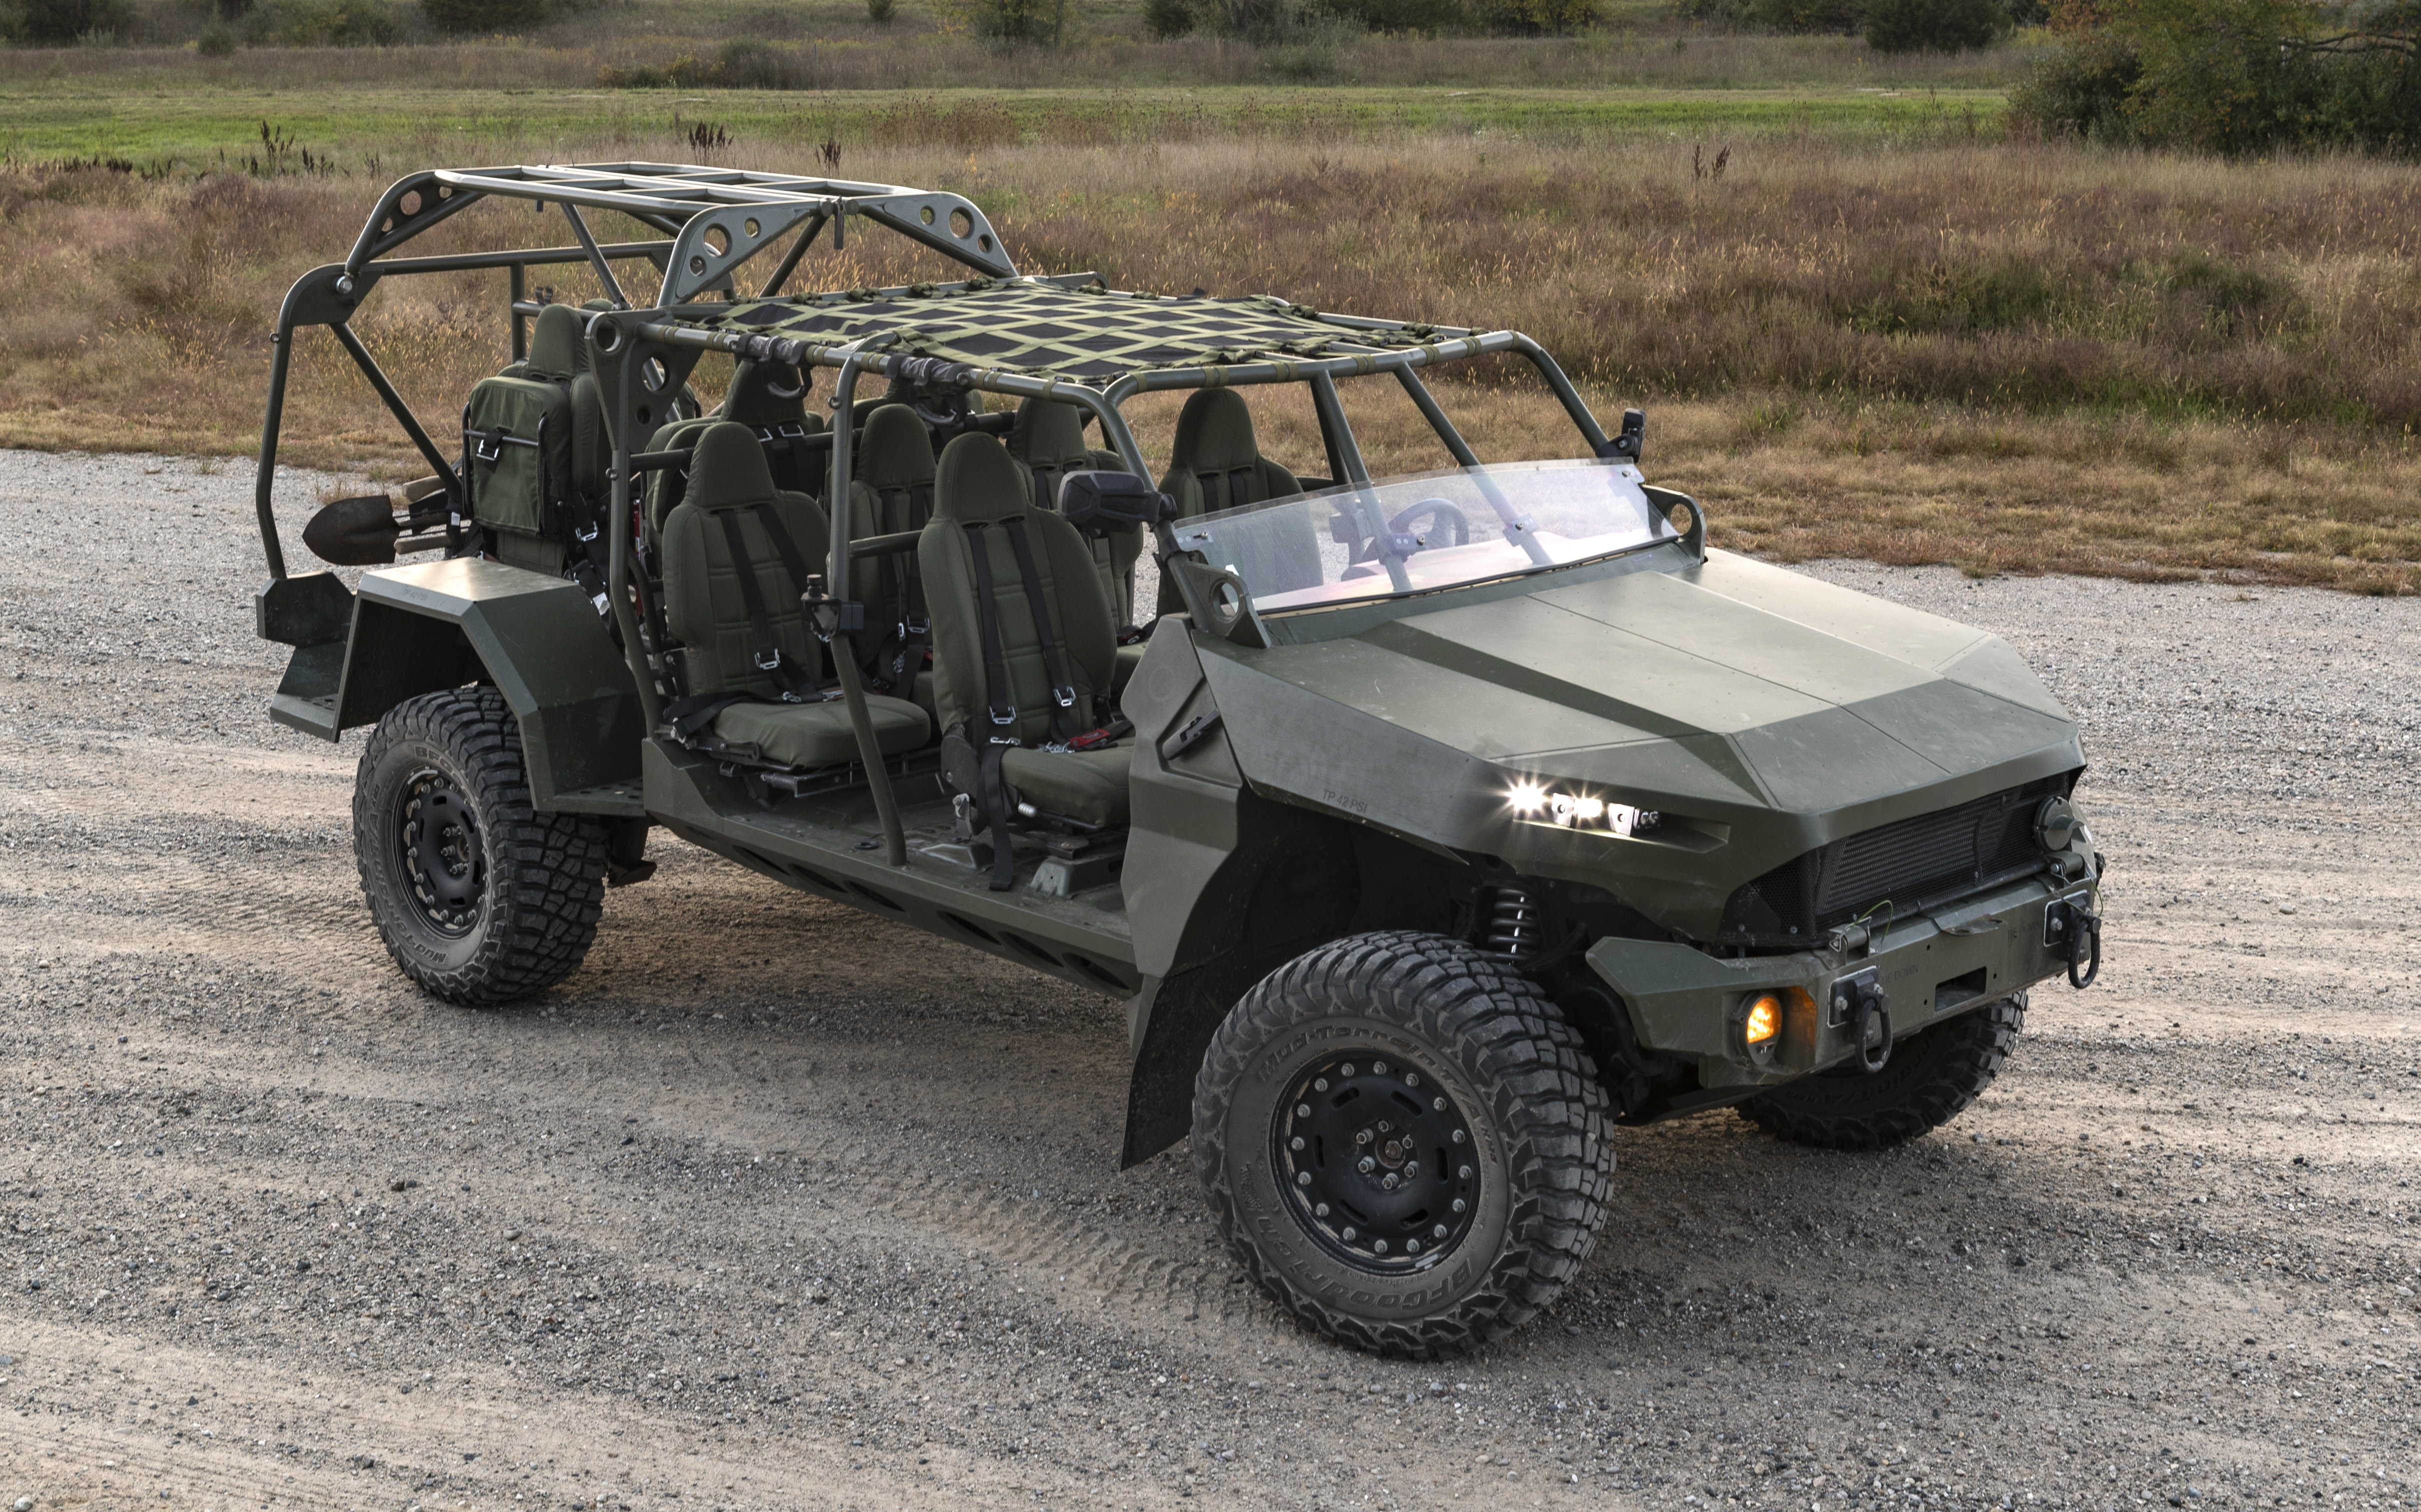 GM Defense has brought forward capabilities from its commercial operations for the Armys Infantry Squad Vehicle